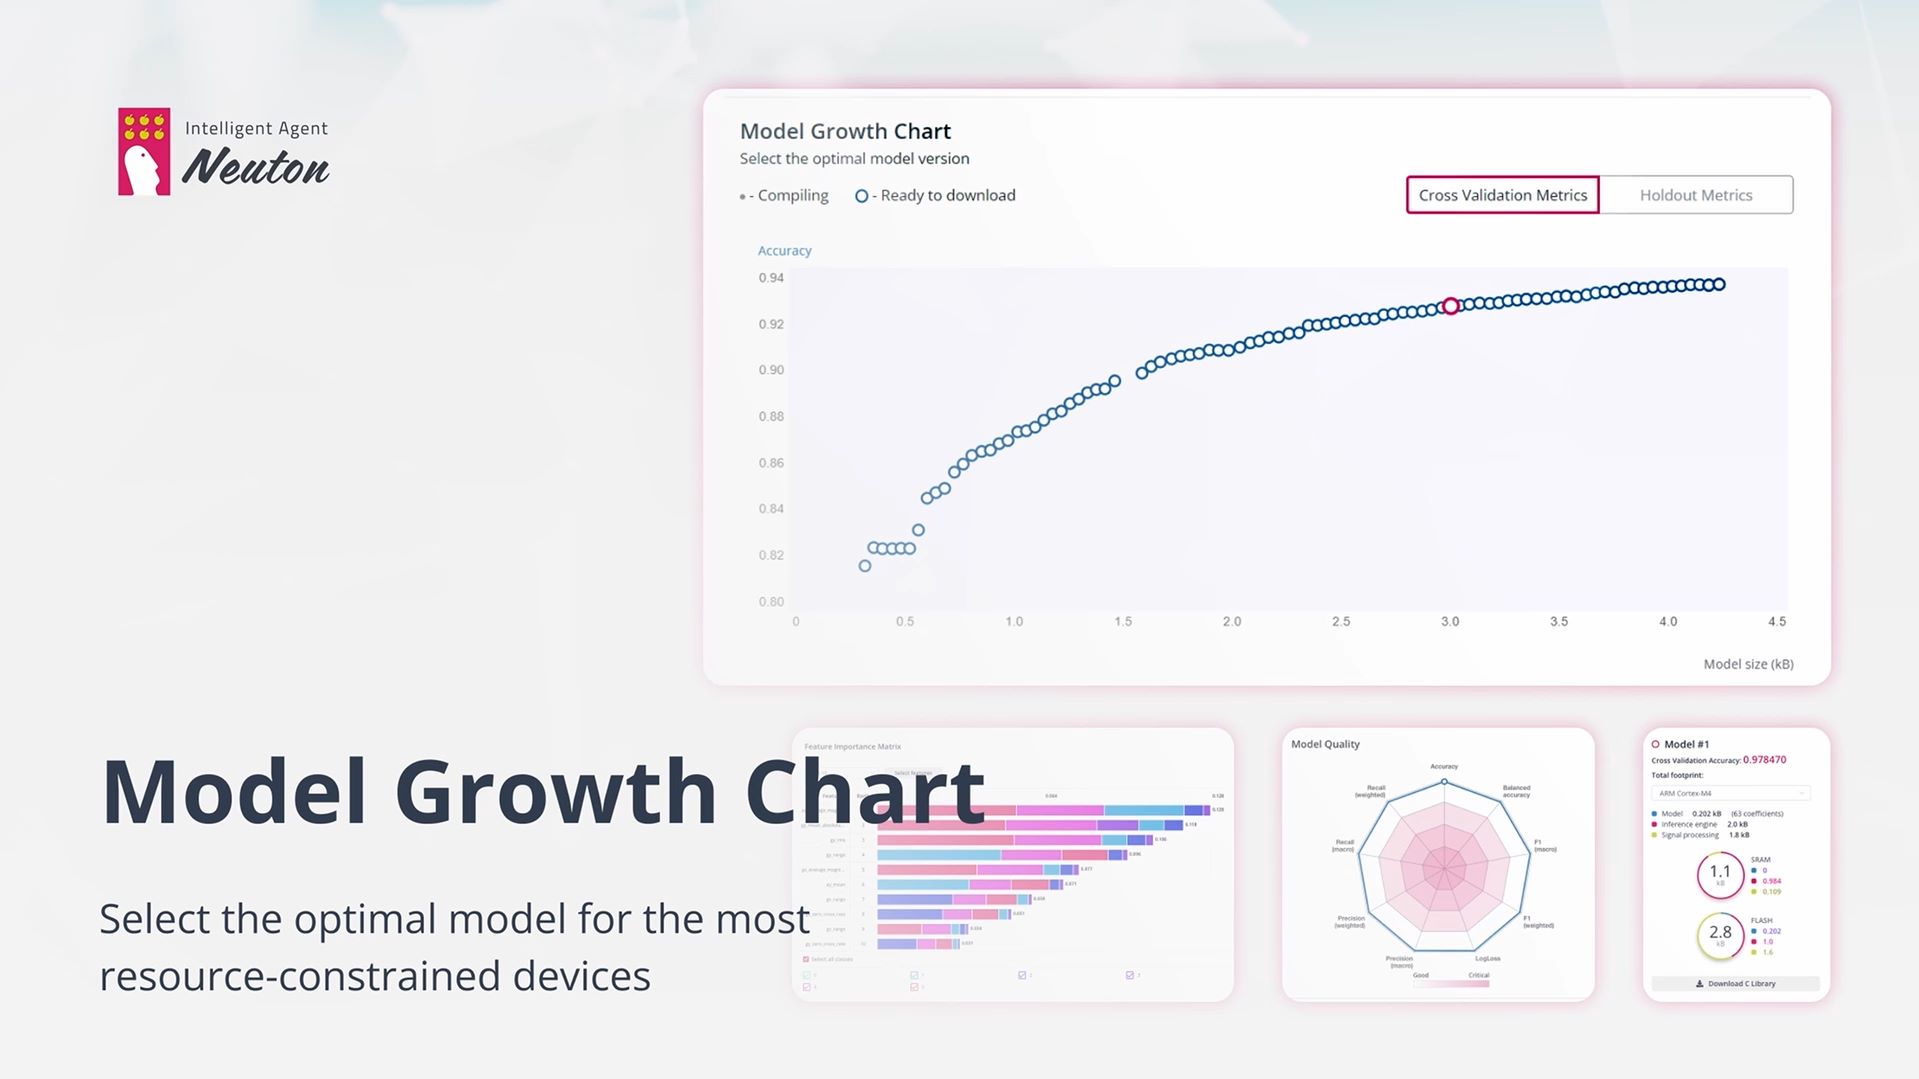 Model Growth Chart, a new exciting feature of the Neuton.AI platform